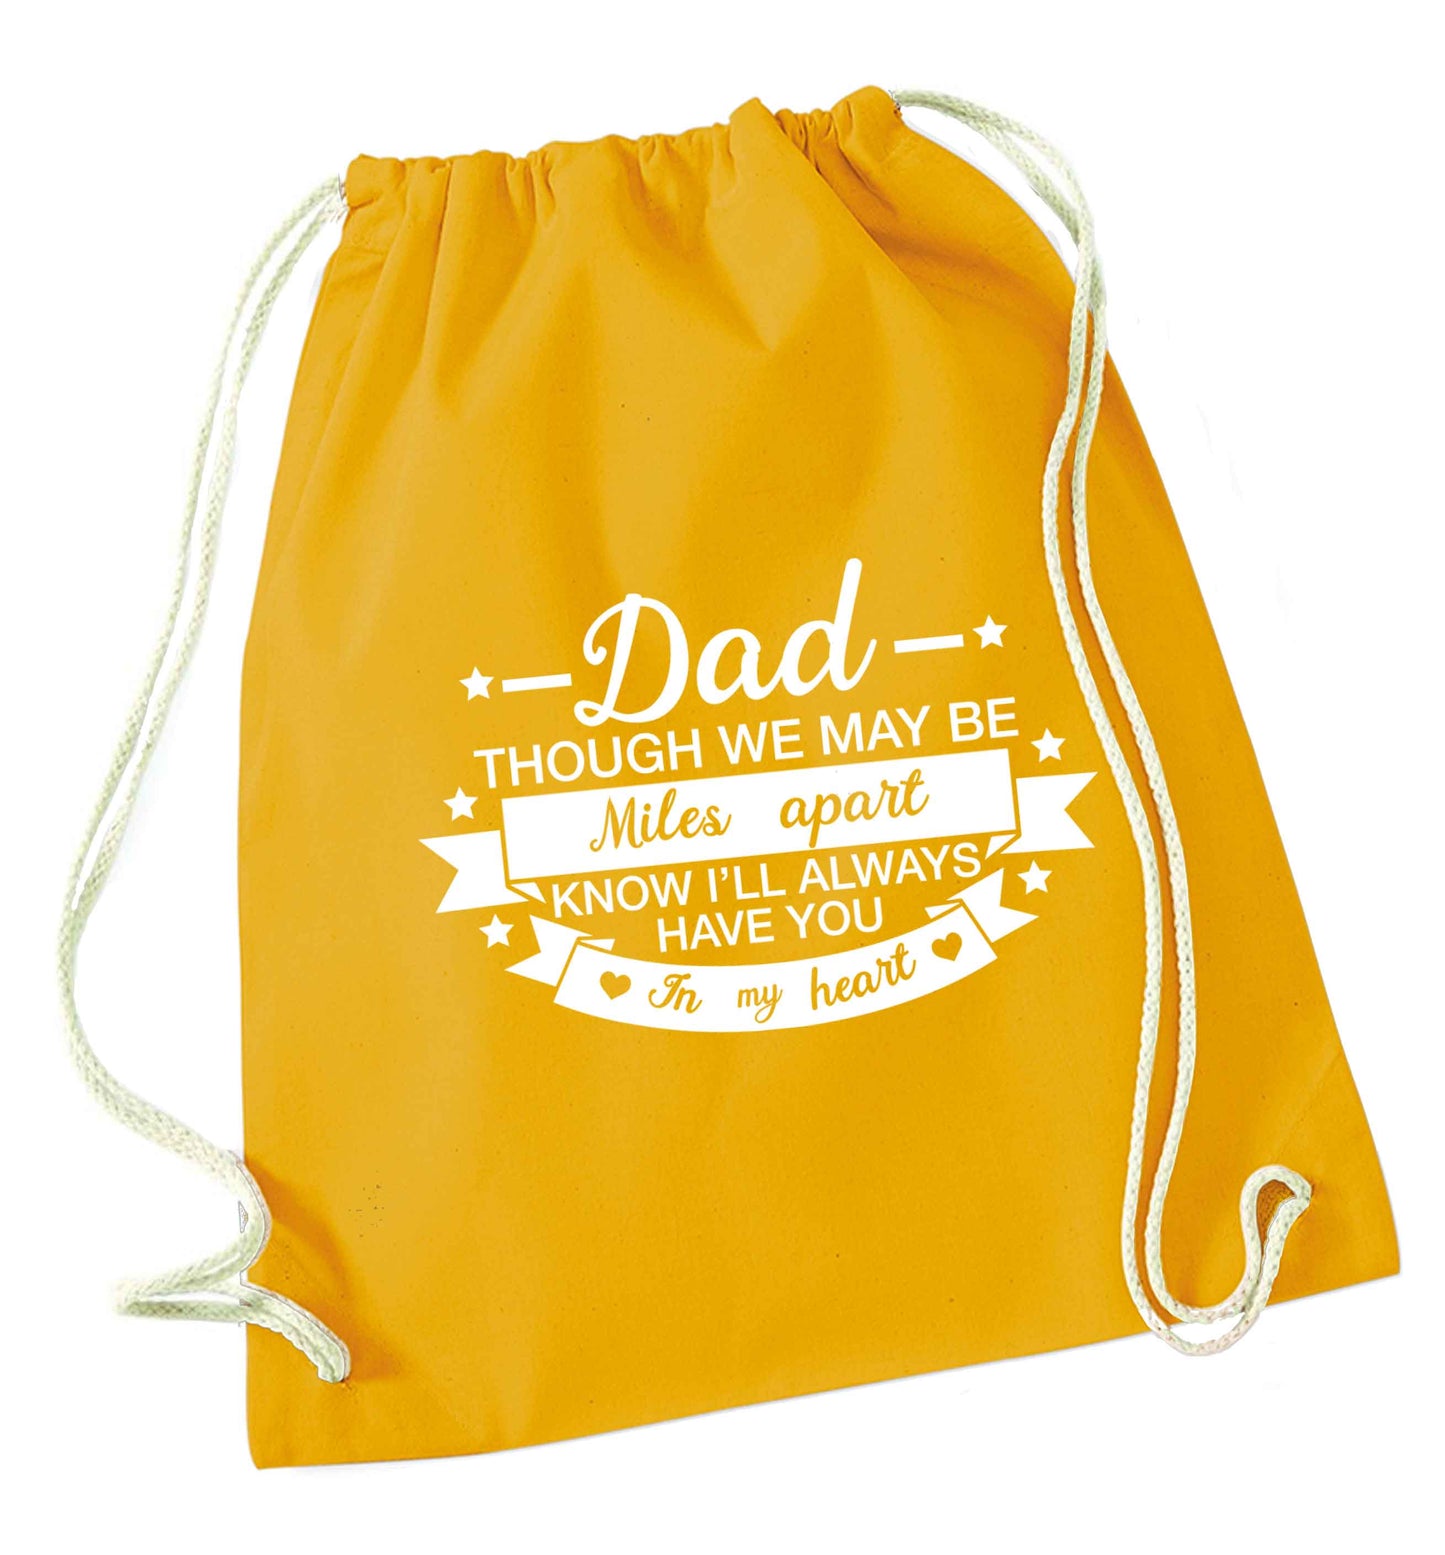 Dad though we are miles apart know I'll always have you in my heart mustard drawstring bag